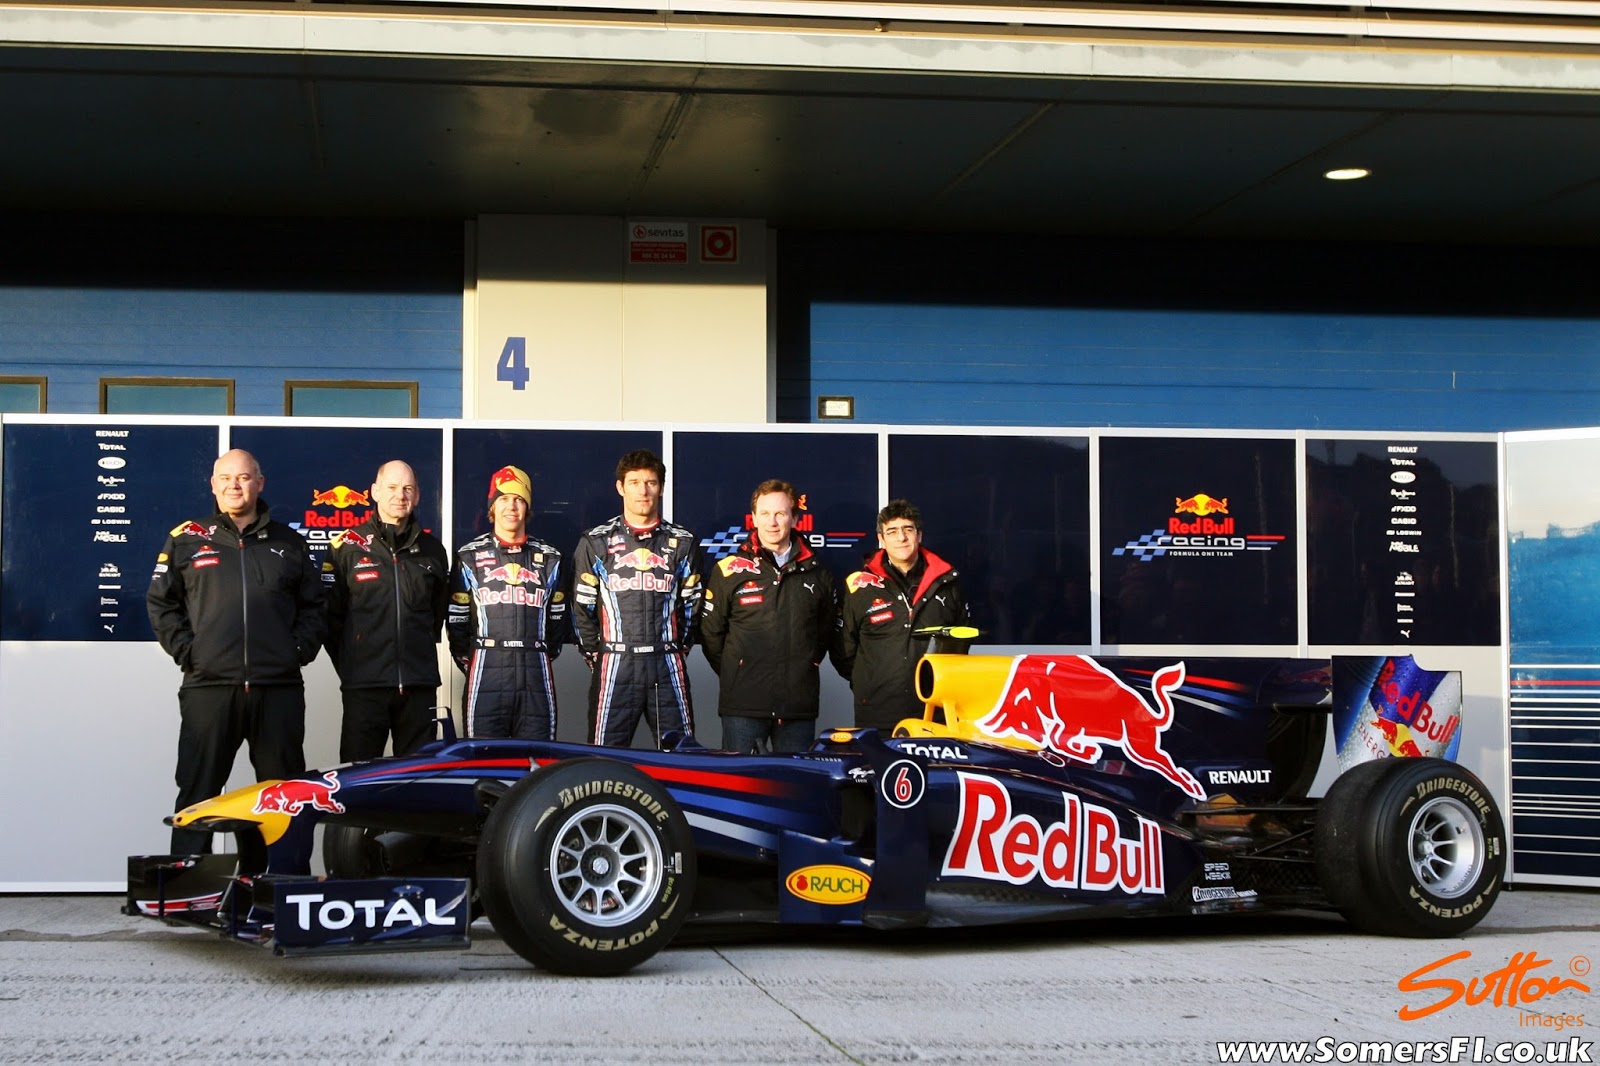 Farmakologi Hotellet form SomersF1 - The technical side of Formula One: #TechF1LE: Red Bull RB6